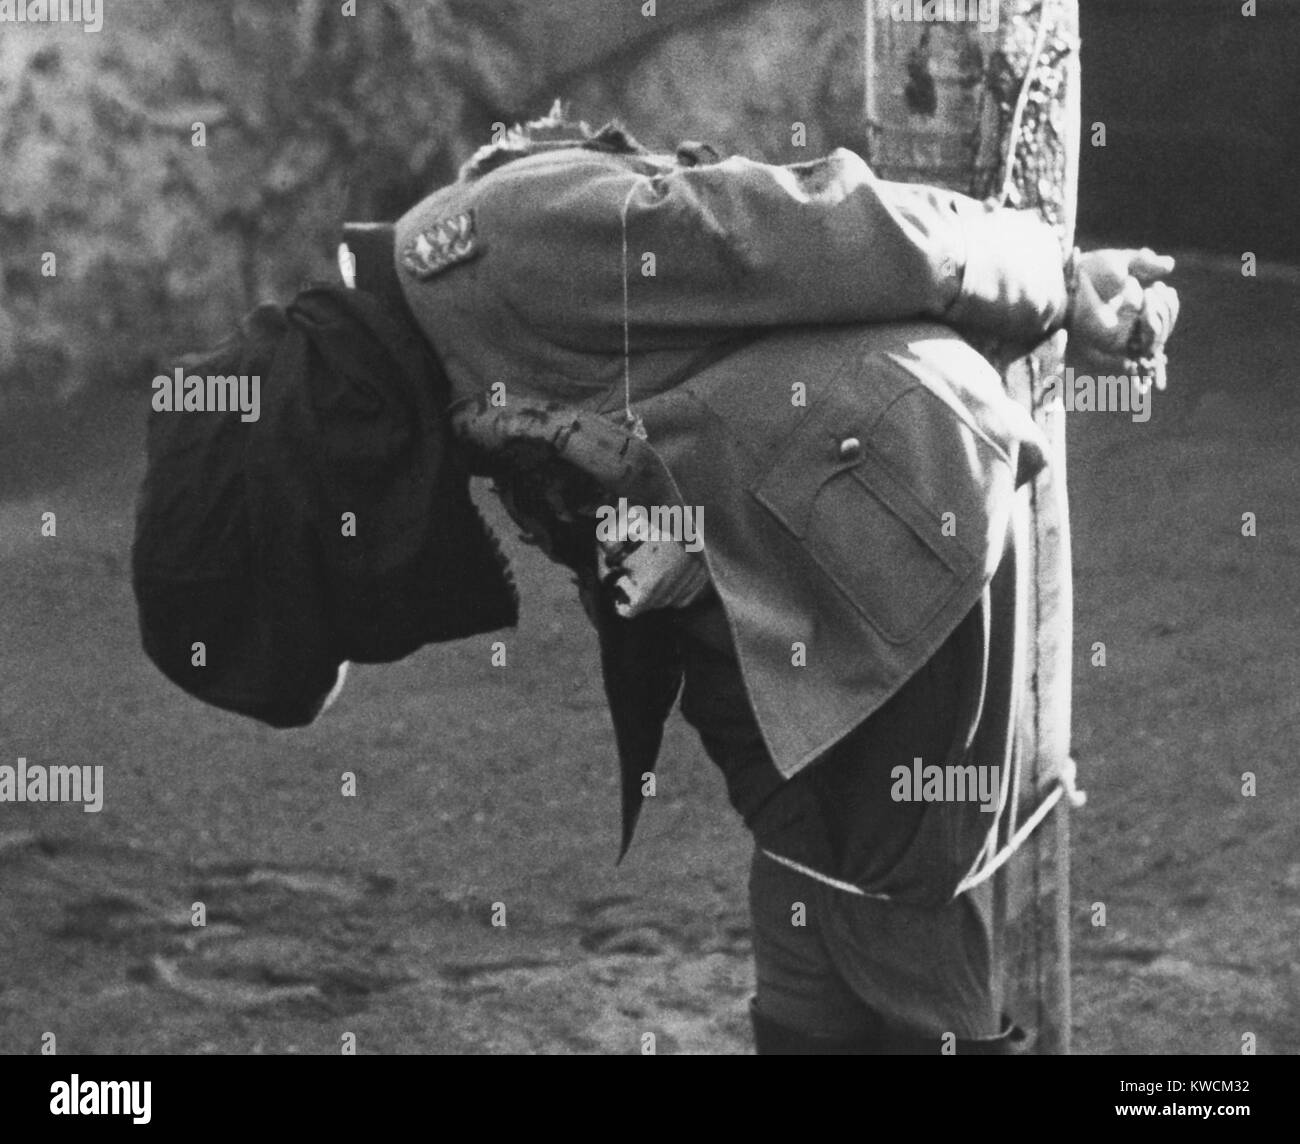 German General Anton Dostler’s body slumps after his execution by a firing squad at Aversa, Italy. Dec. 1, 1945.He was convicted of issuing an illegal order for the execution of 15 U.S. Army commandos in Italy in March 1944. (BSLOC 2014 13 7) Stock Photo